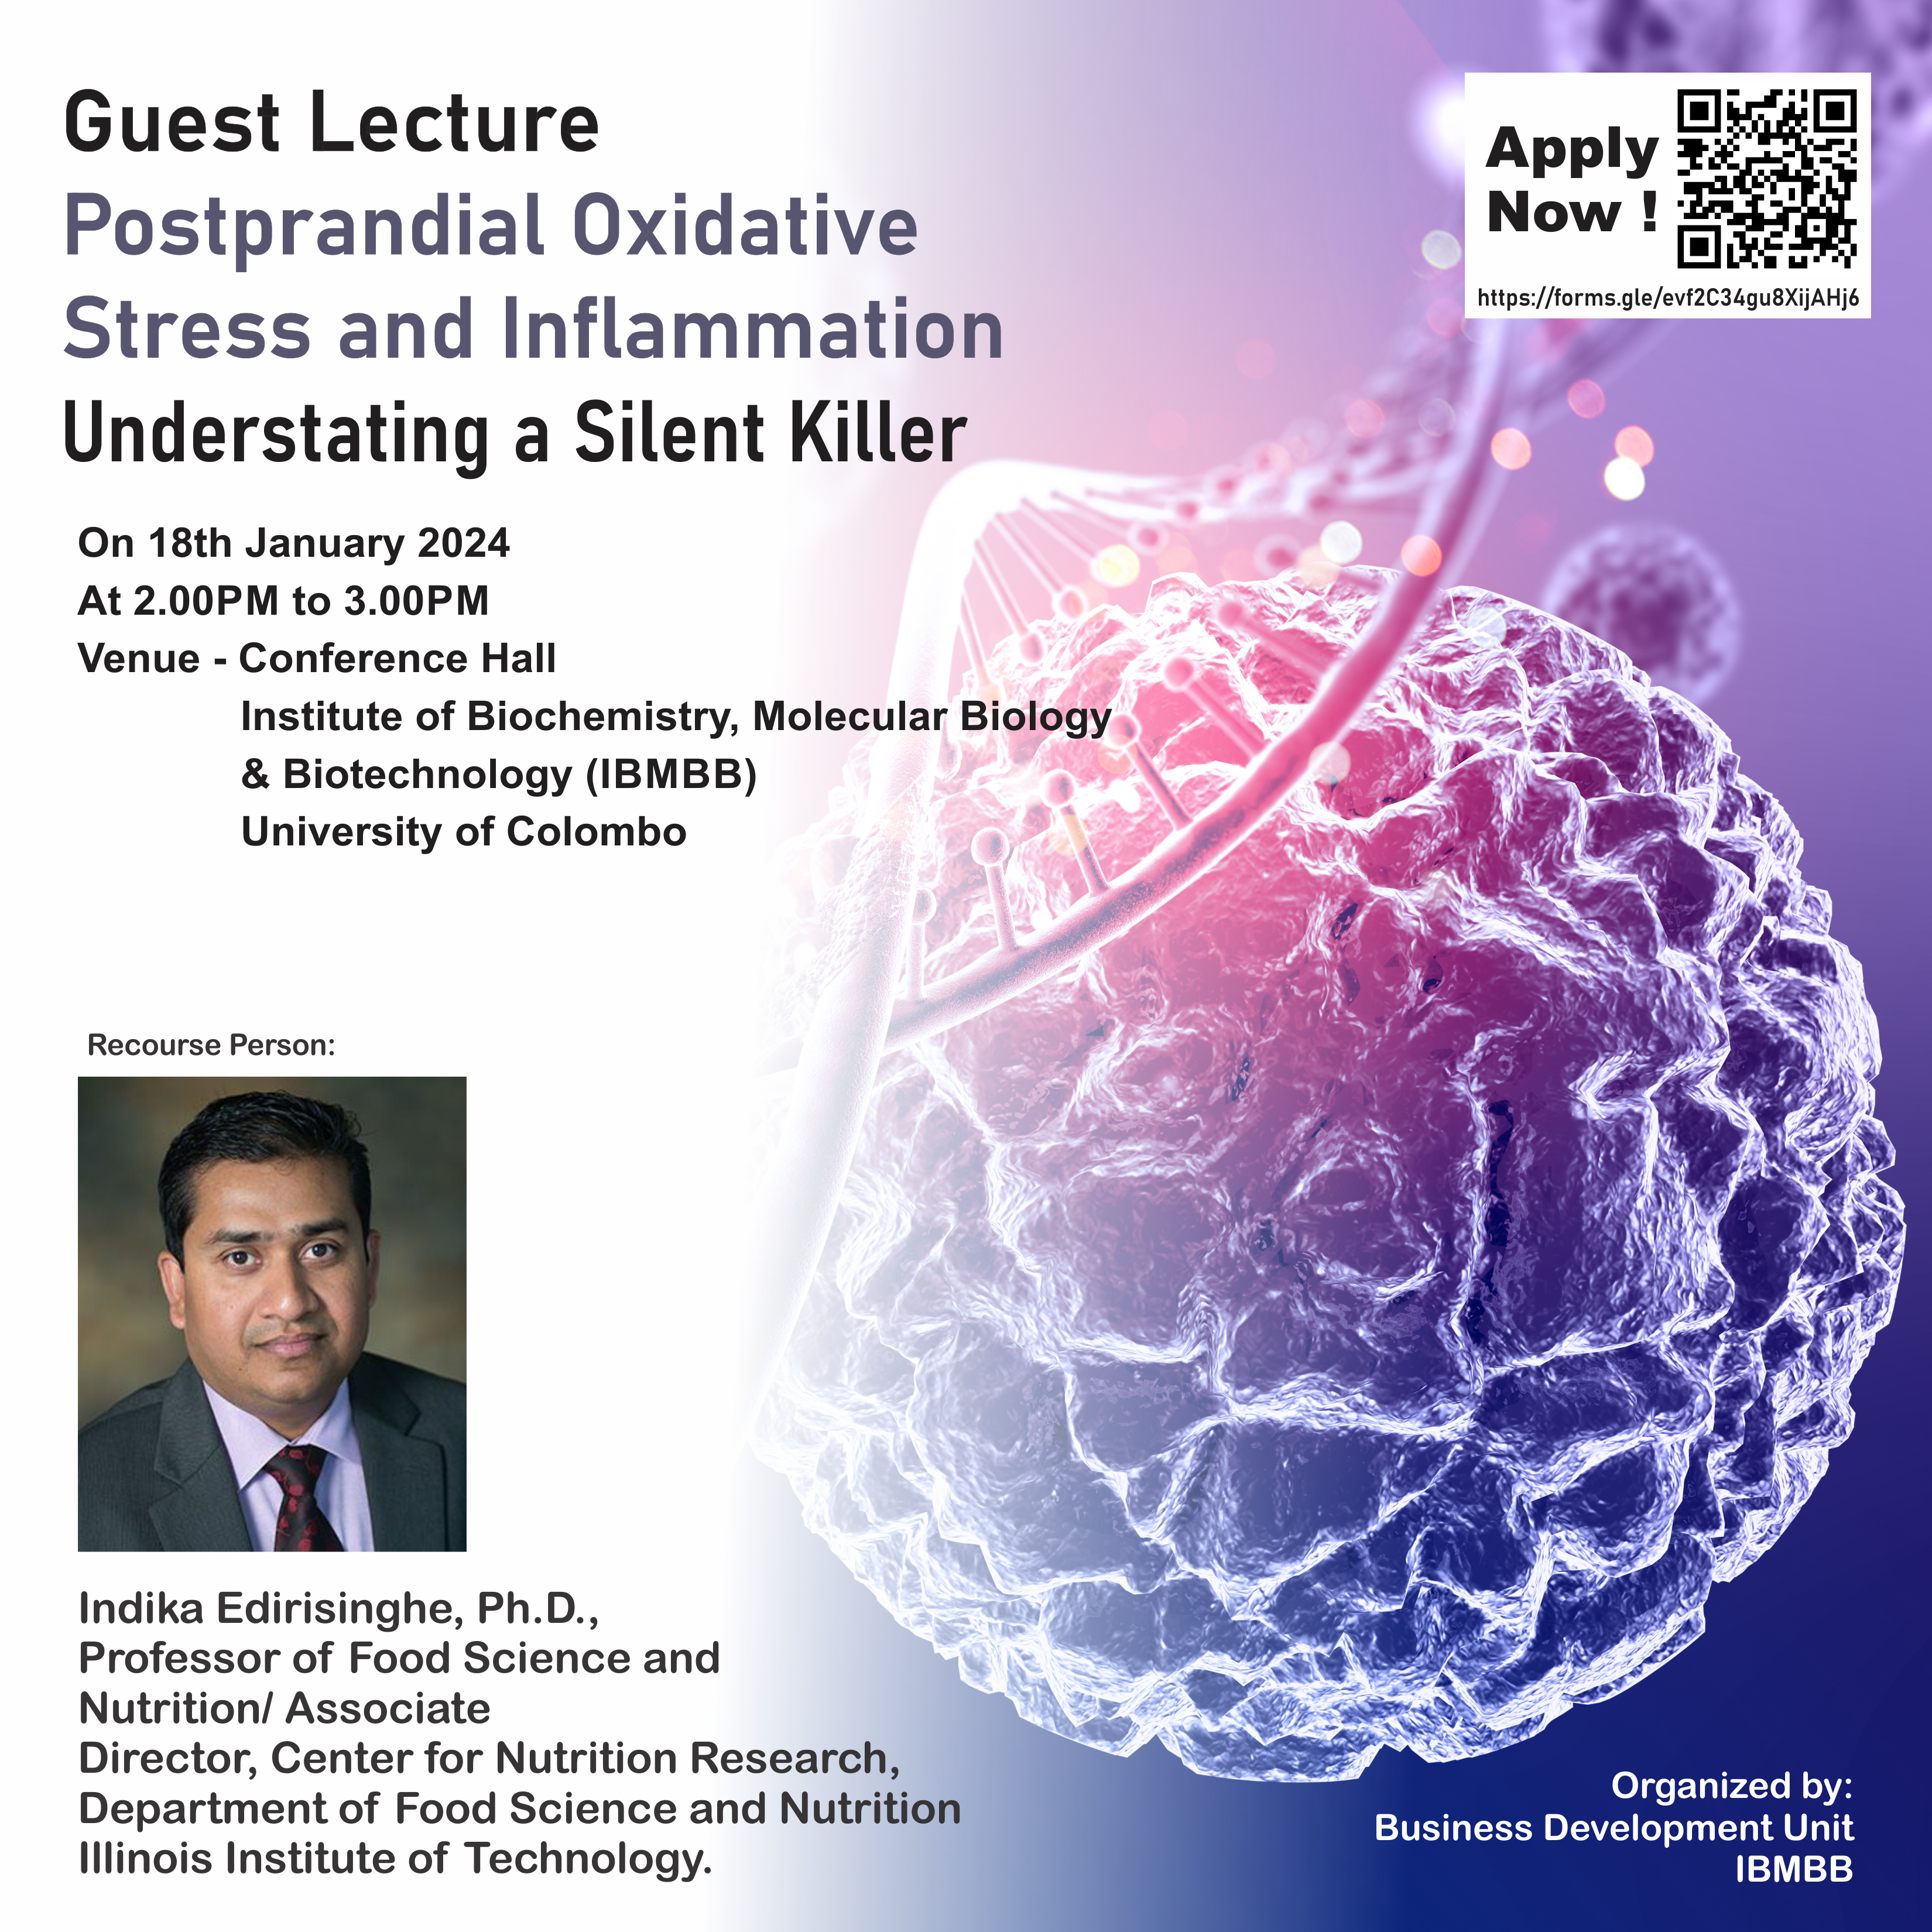 Postprandial Oxidative Stress and Inflammation- Understating a Silent Killer (Guest Lecture)